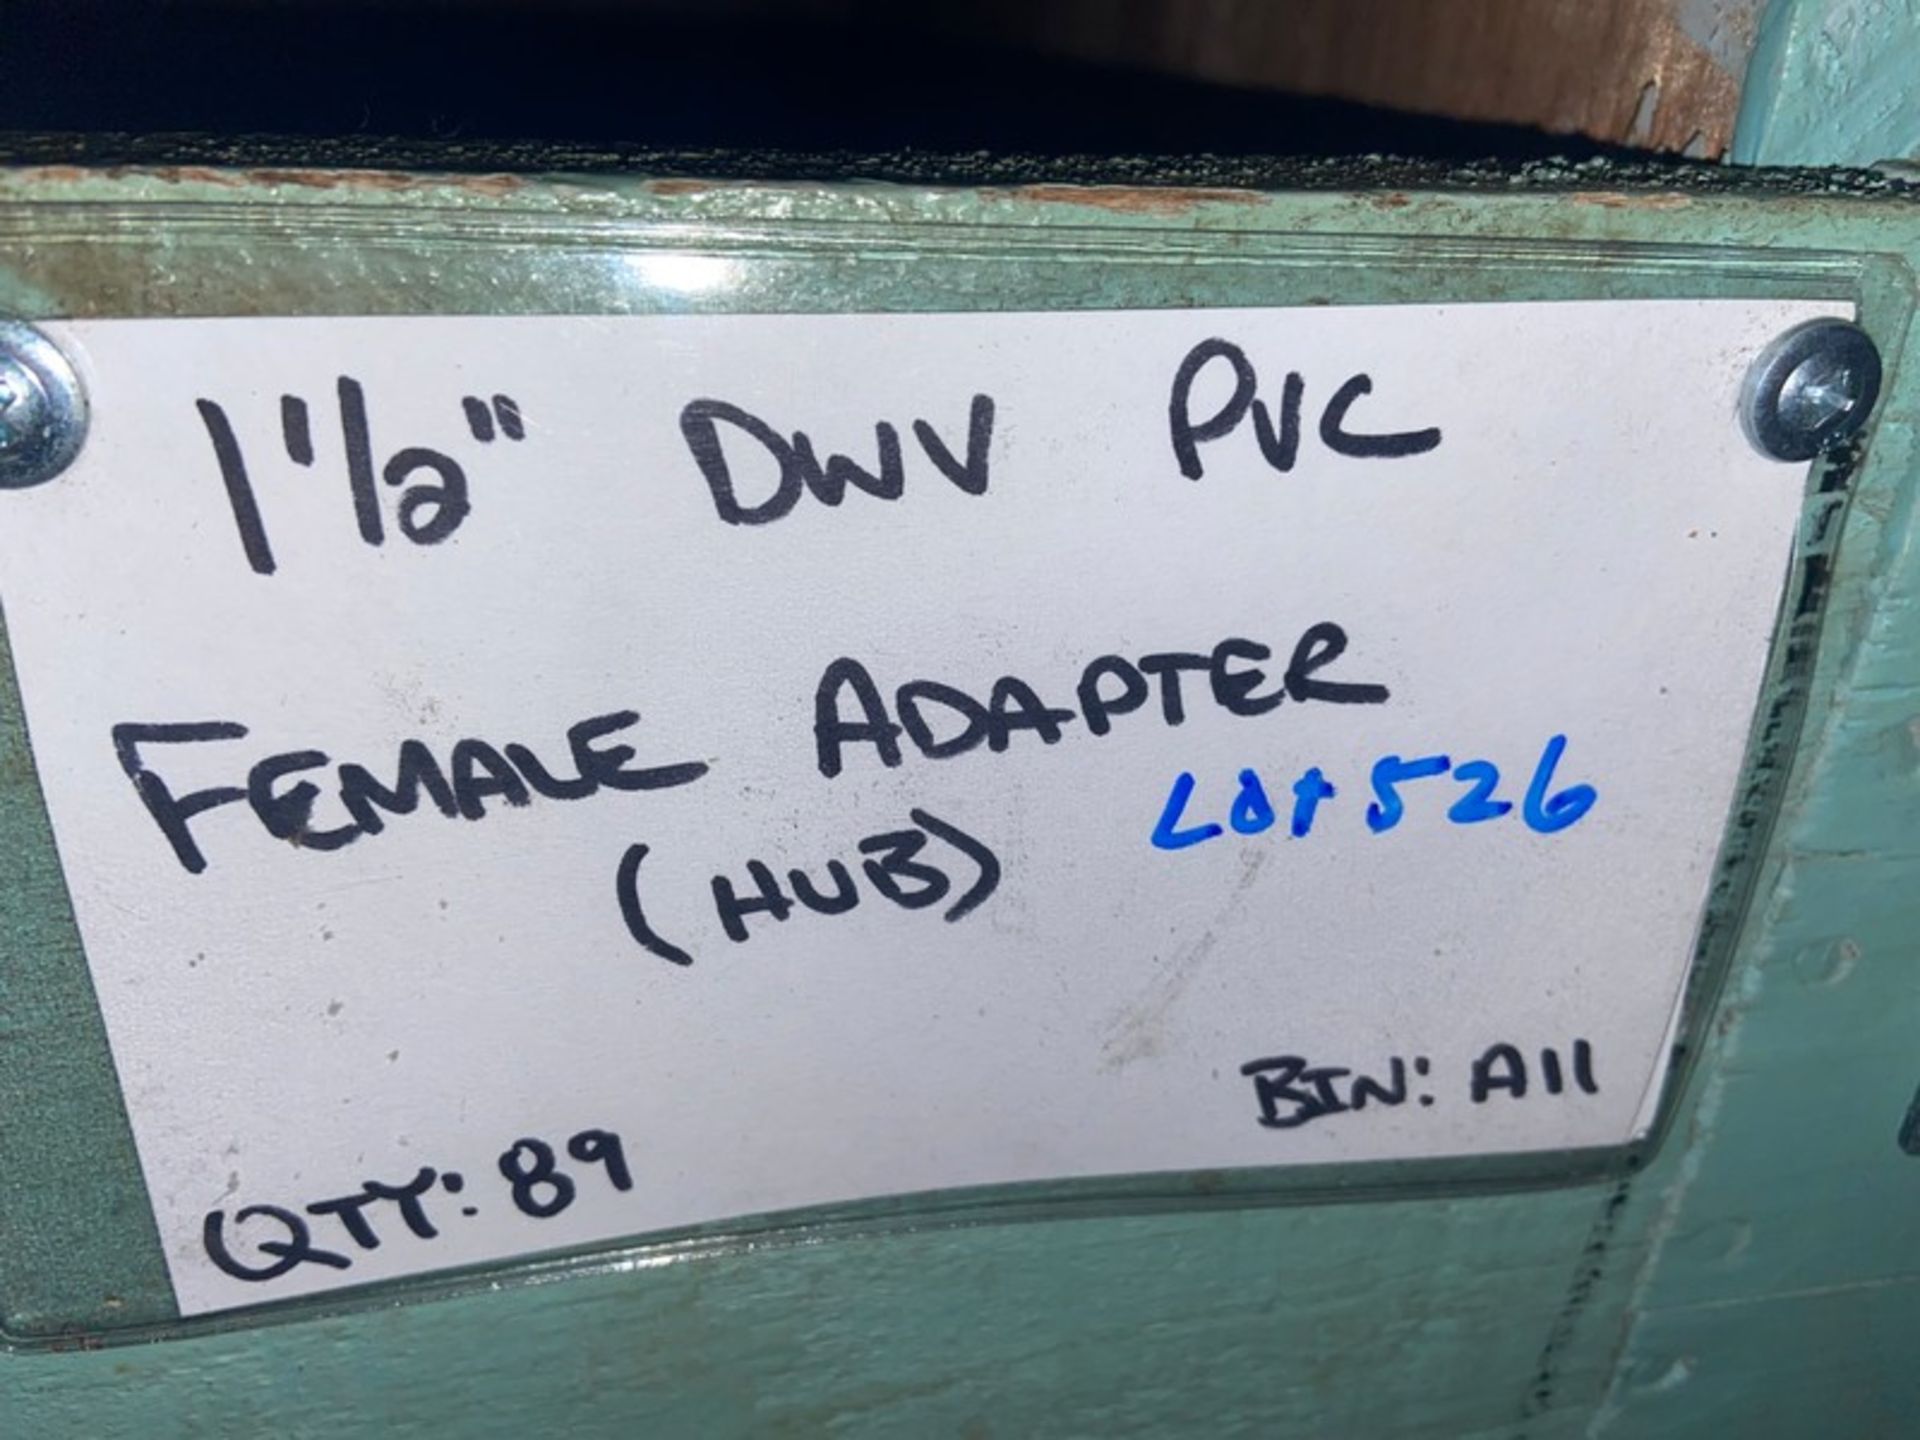 (89) 1 1/2” DWV PVC Female Adapter (HUB) (Bin:A11) (LOCATED IN MONROEVILLE, PA) - Image 8 of 8